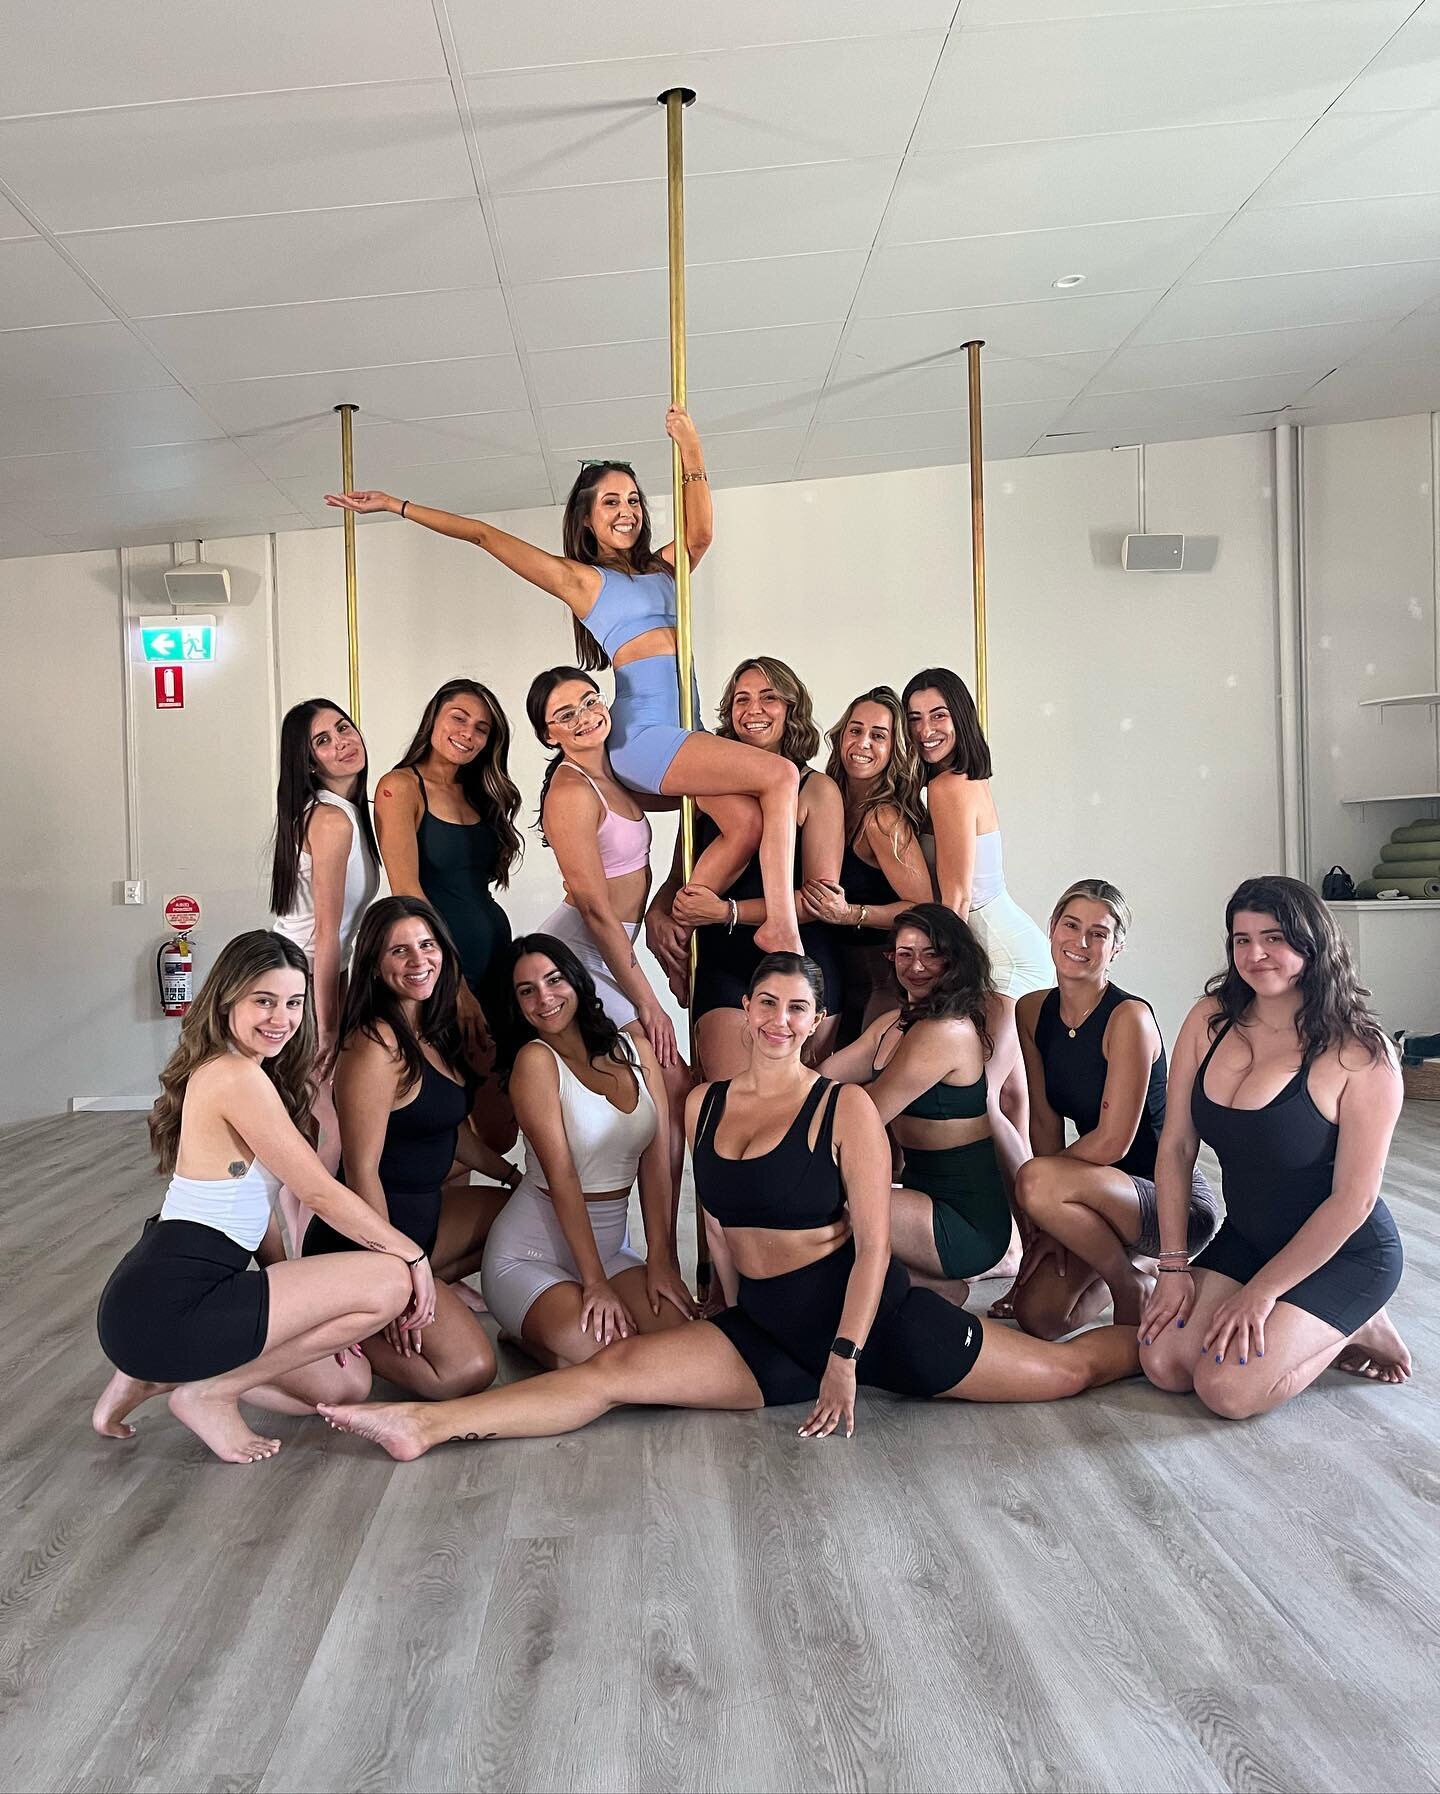 Another amazing Hens Party group @starpolestudiobyronbay. 
With over a decade of experience we will guarantee you a fun and memorable time. We cater to groups big or small. Come to us or we come to you. 
#hensparty #henspartyideas #byronbay #poledanc